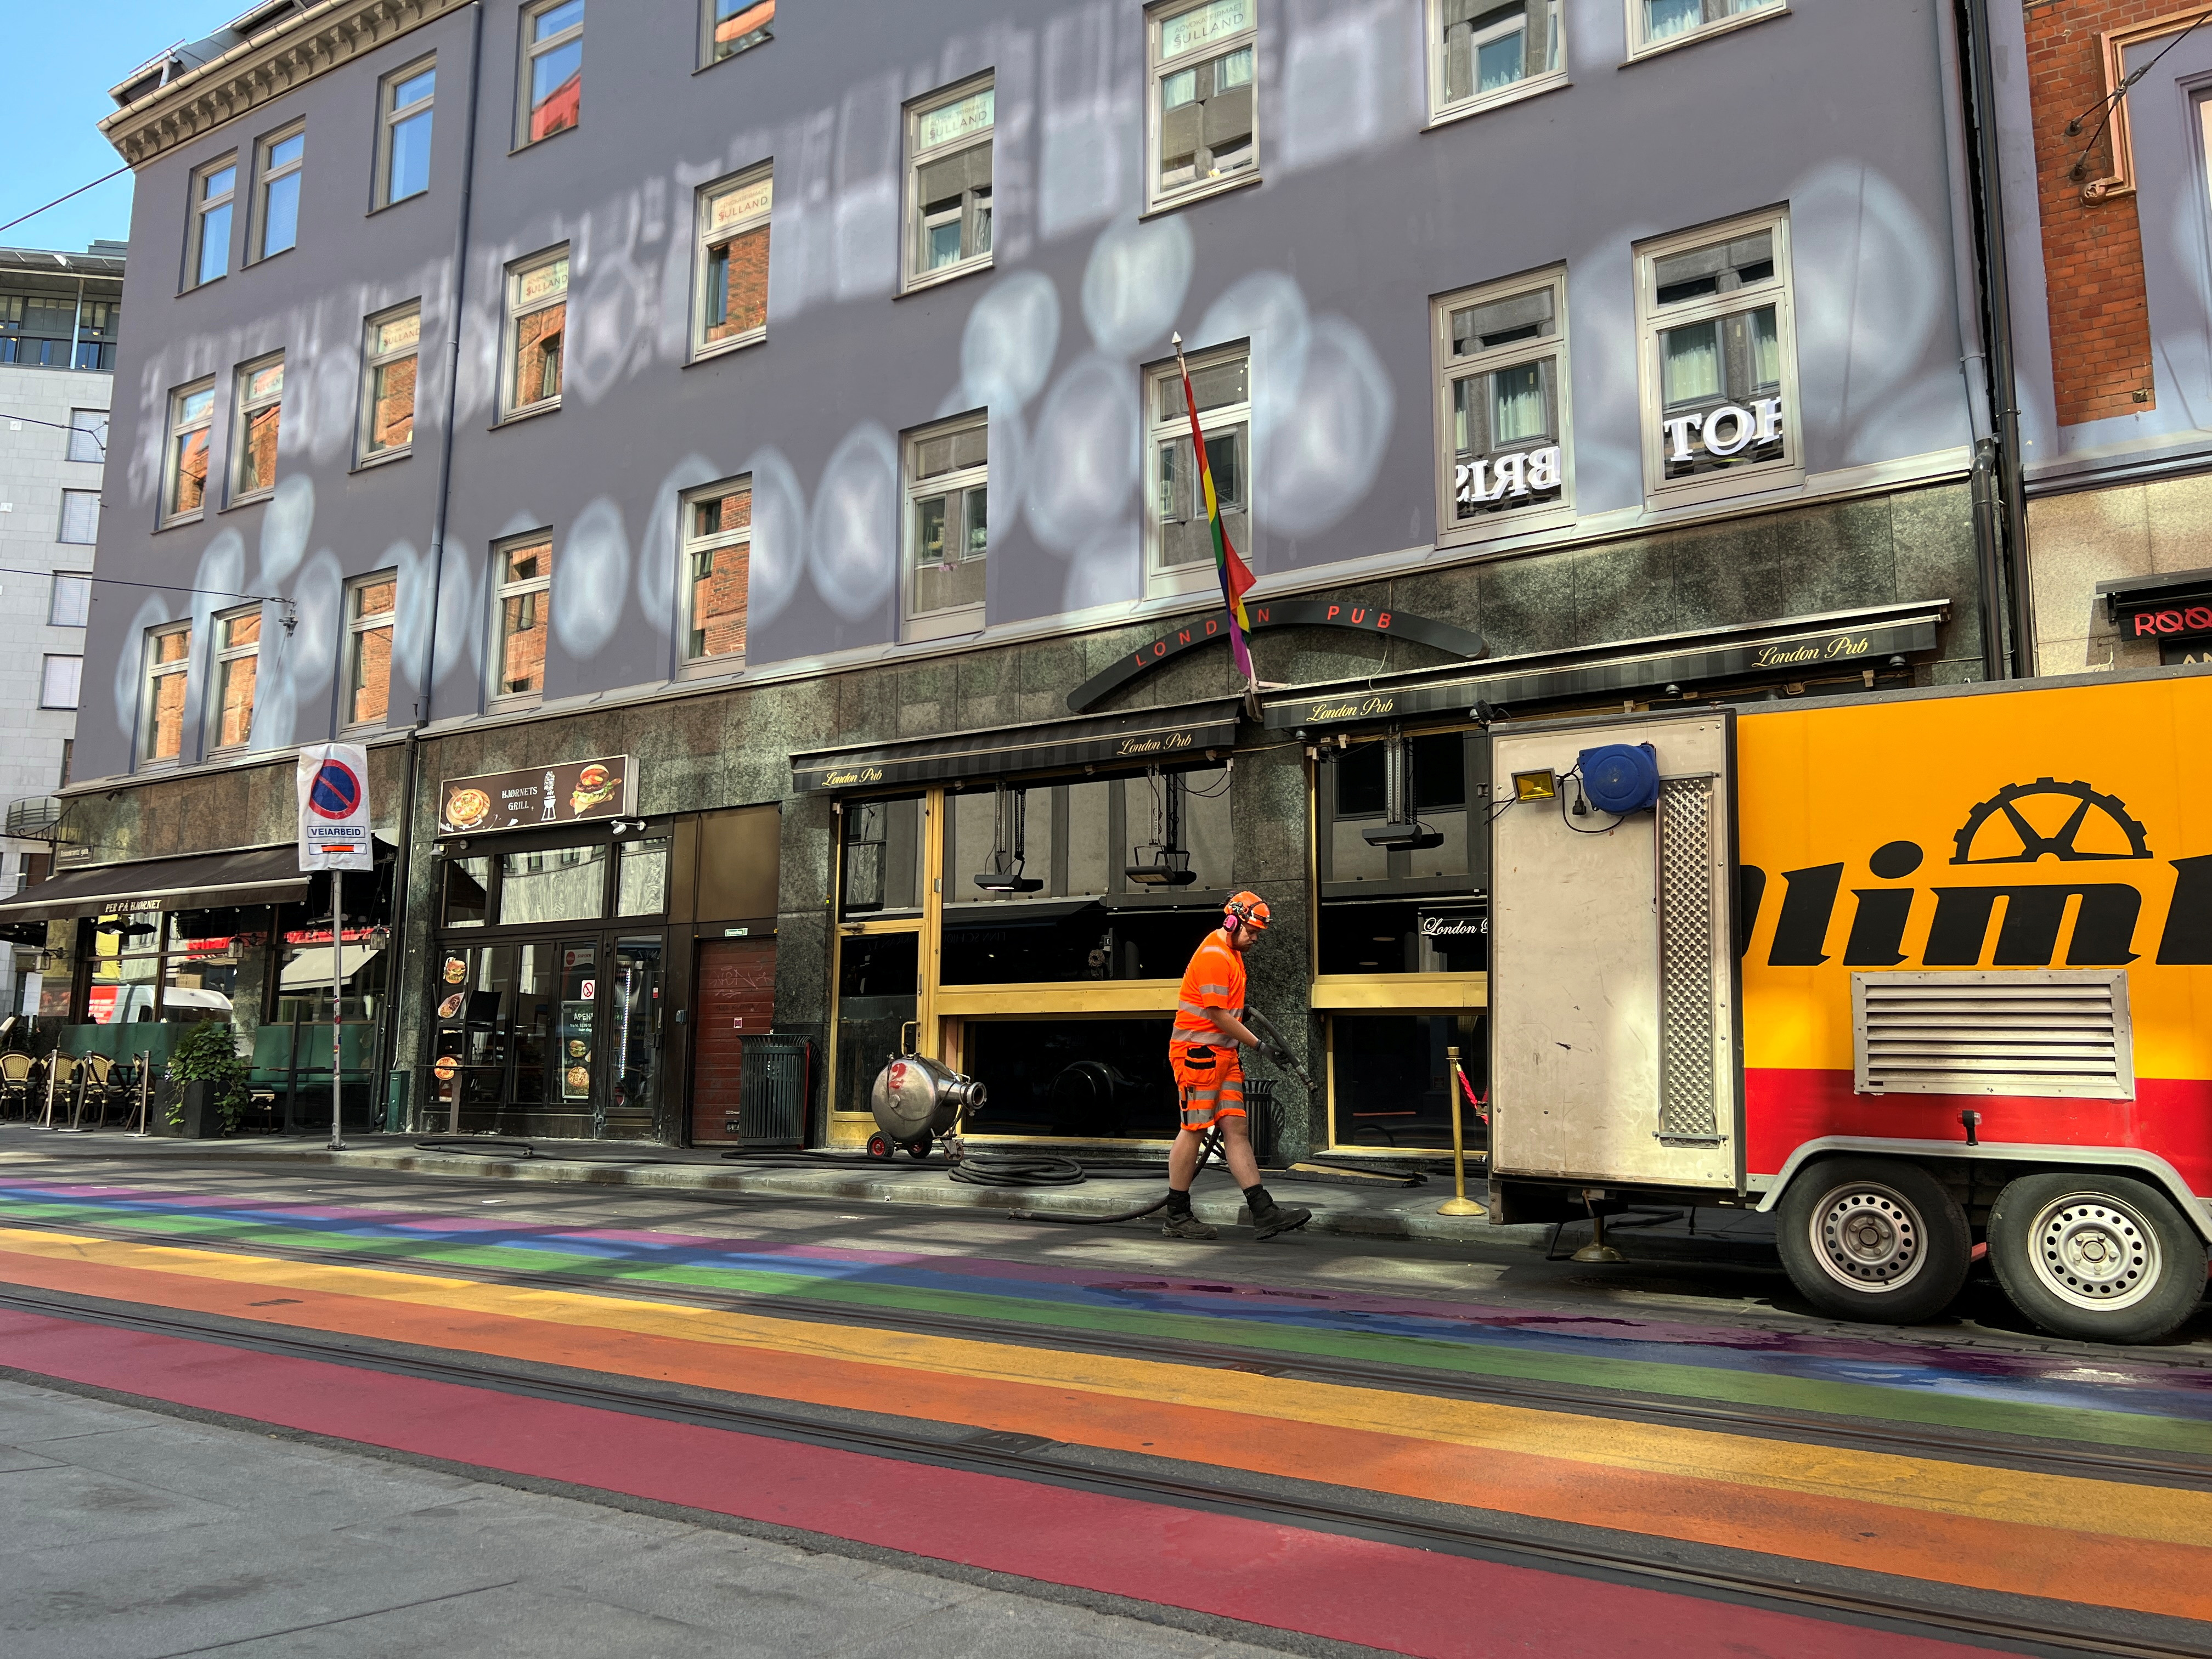 The London Pub, site of a mass shooting, in Oslo